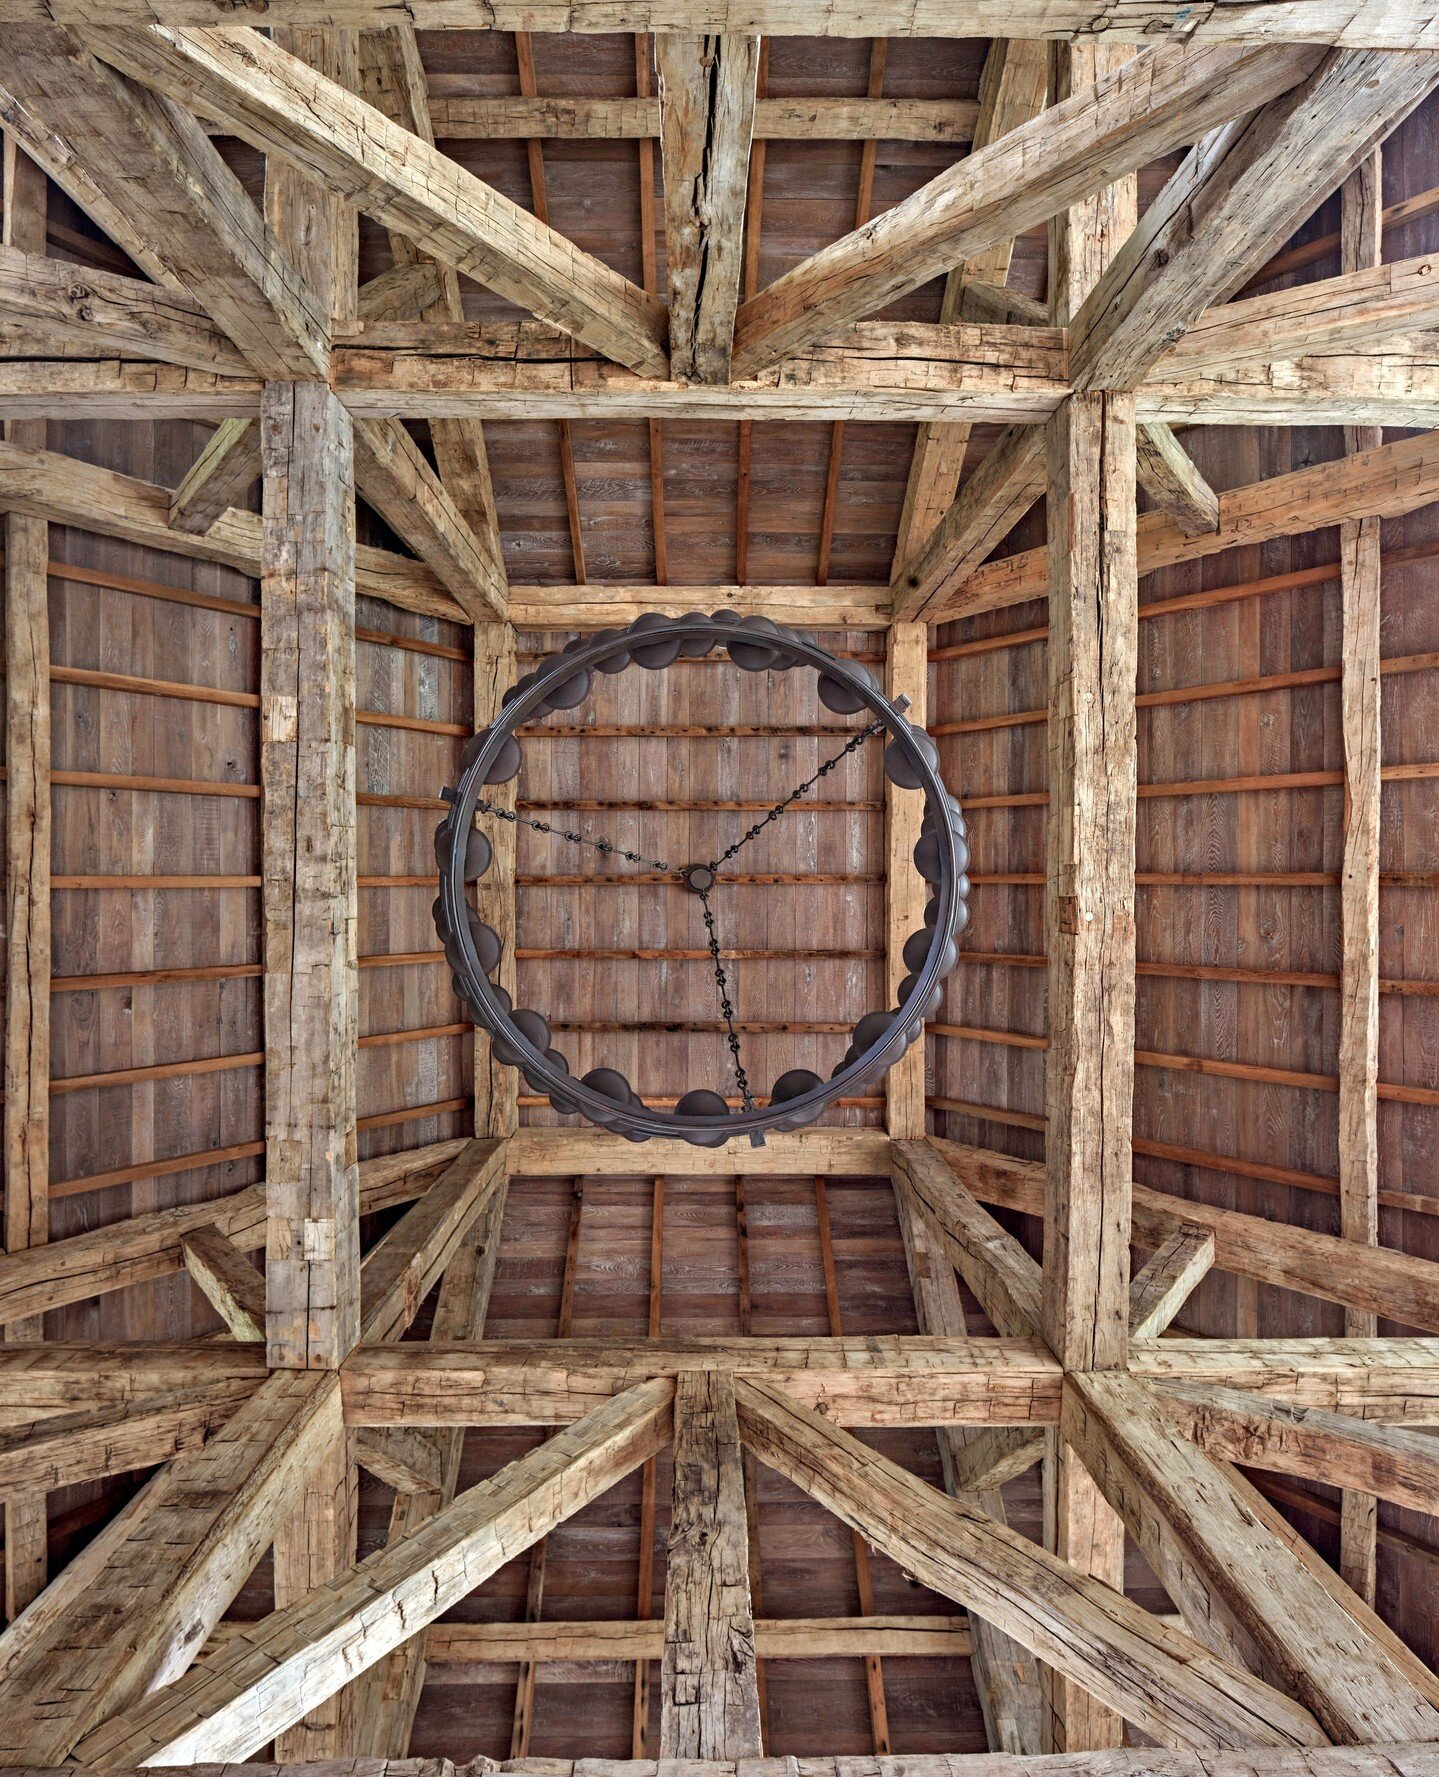 The ceiling and supporting trusses are constructed of hand-hewn antique timber beams, antique sawn rafters, and barn-board sheathing.  Each timber was hand-selected for its size and finish.⁠
⁠
Architect: @charleshiltonarchitects⁠
Interior Designer: @